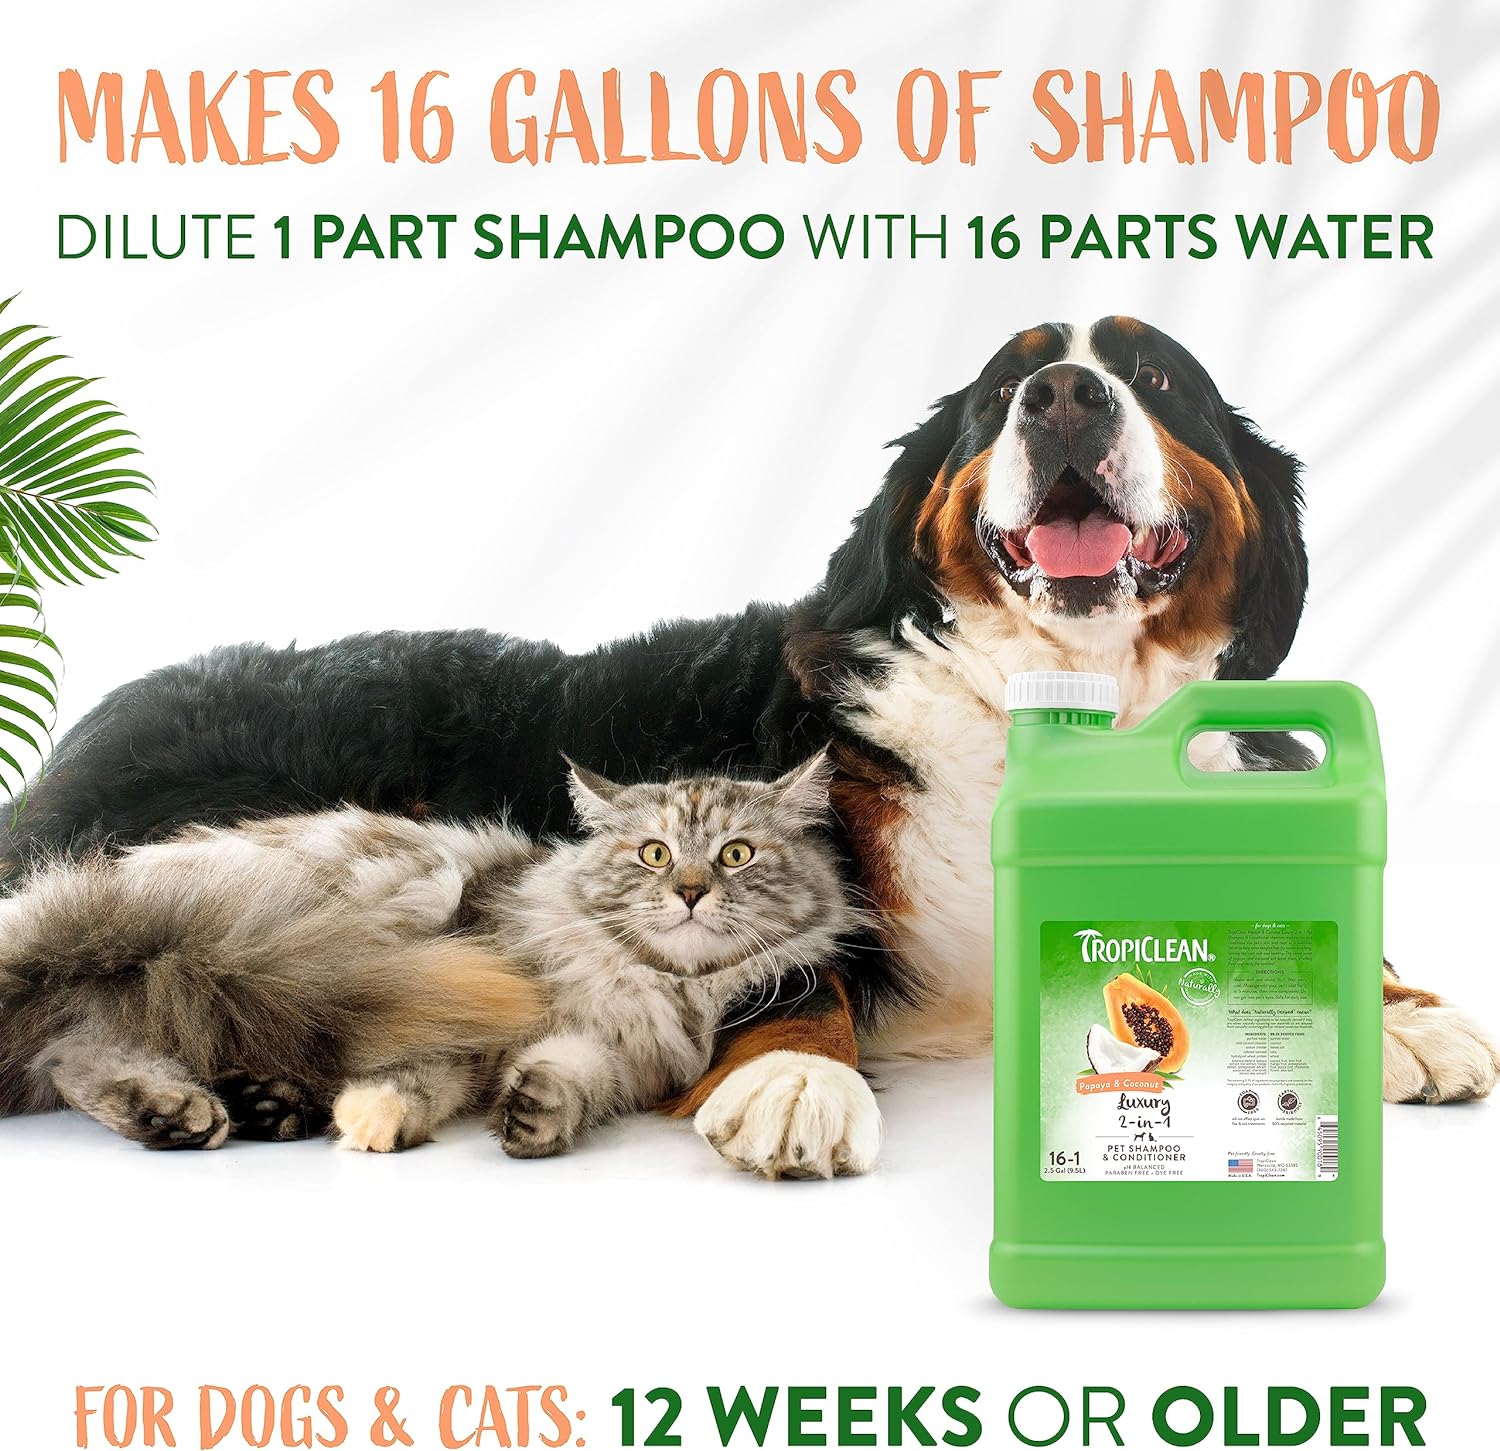 TropiClean 2-in-1 Papaya & Coconut Dog Shampoo and Conditioner | Natural Pet Shampoo Derived from Natural Ingredients | Cat Friendly | Made in the USA | 2.5 gallon